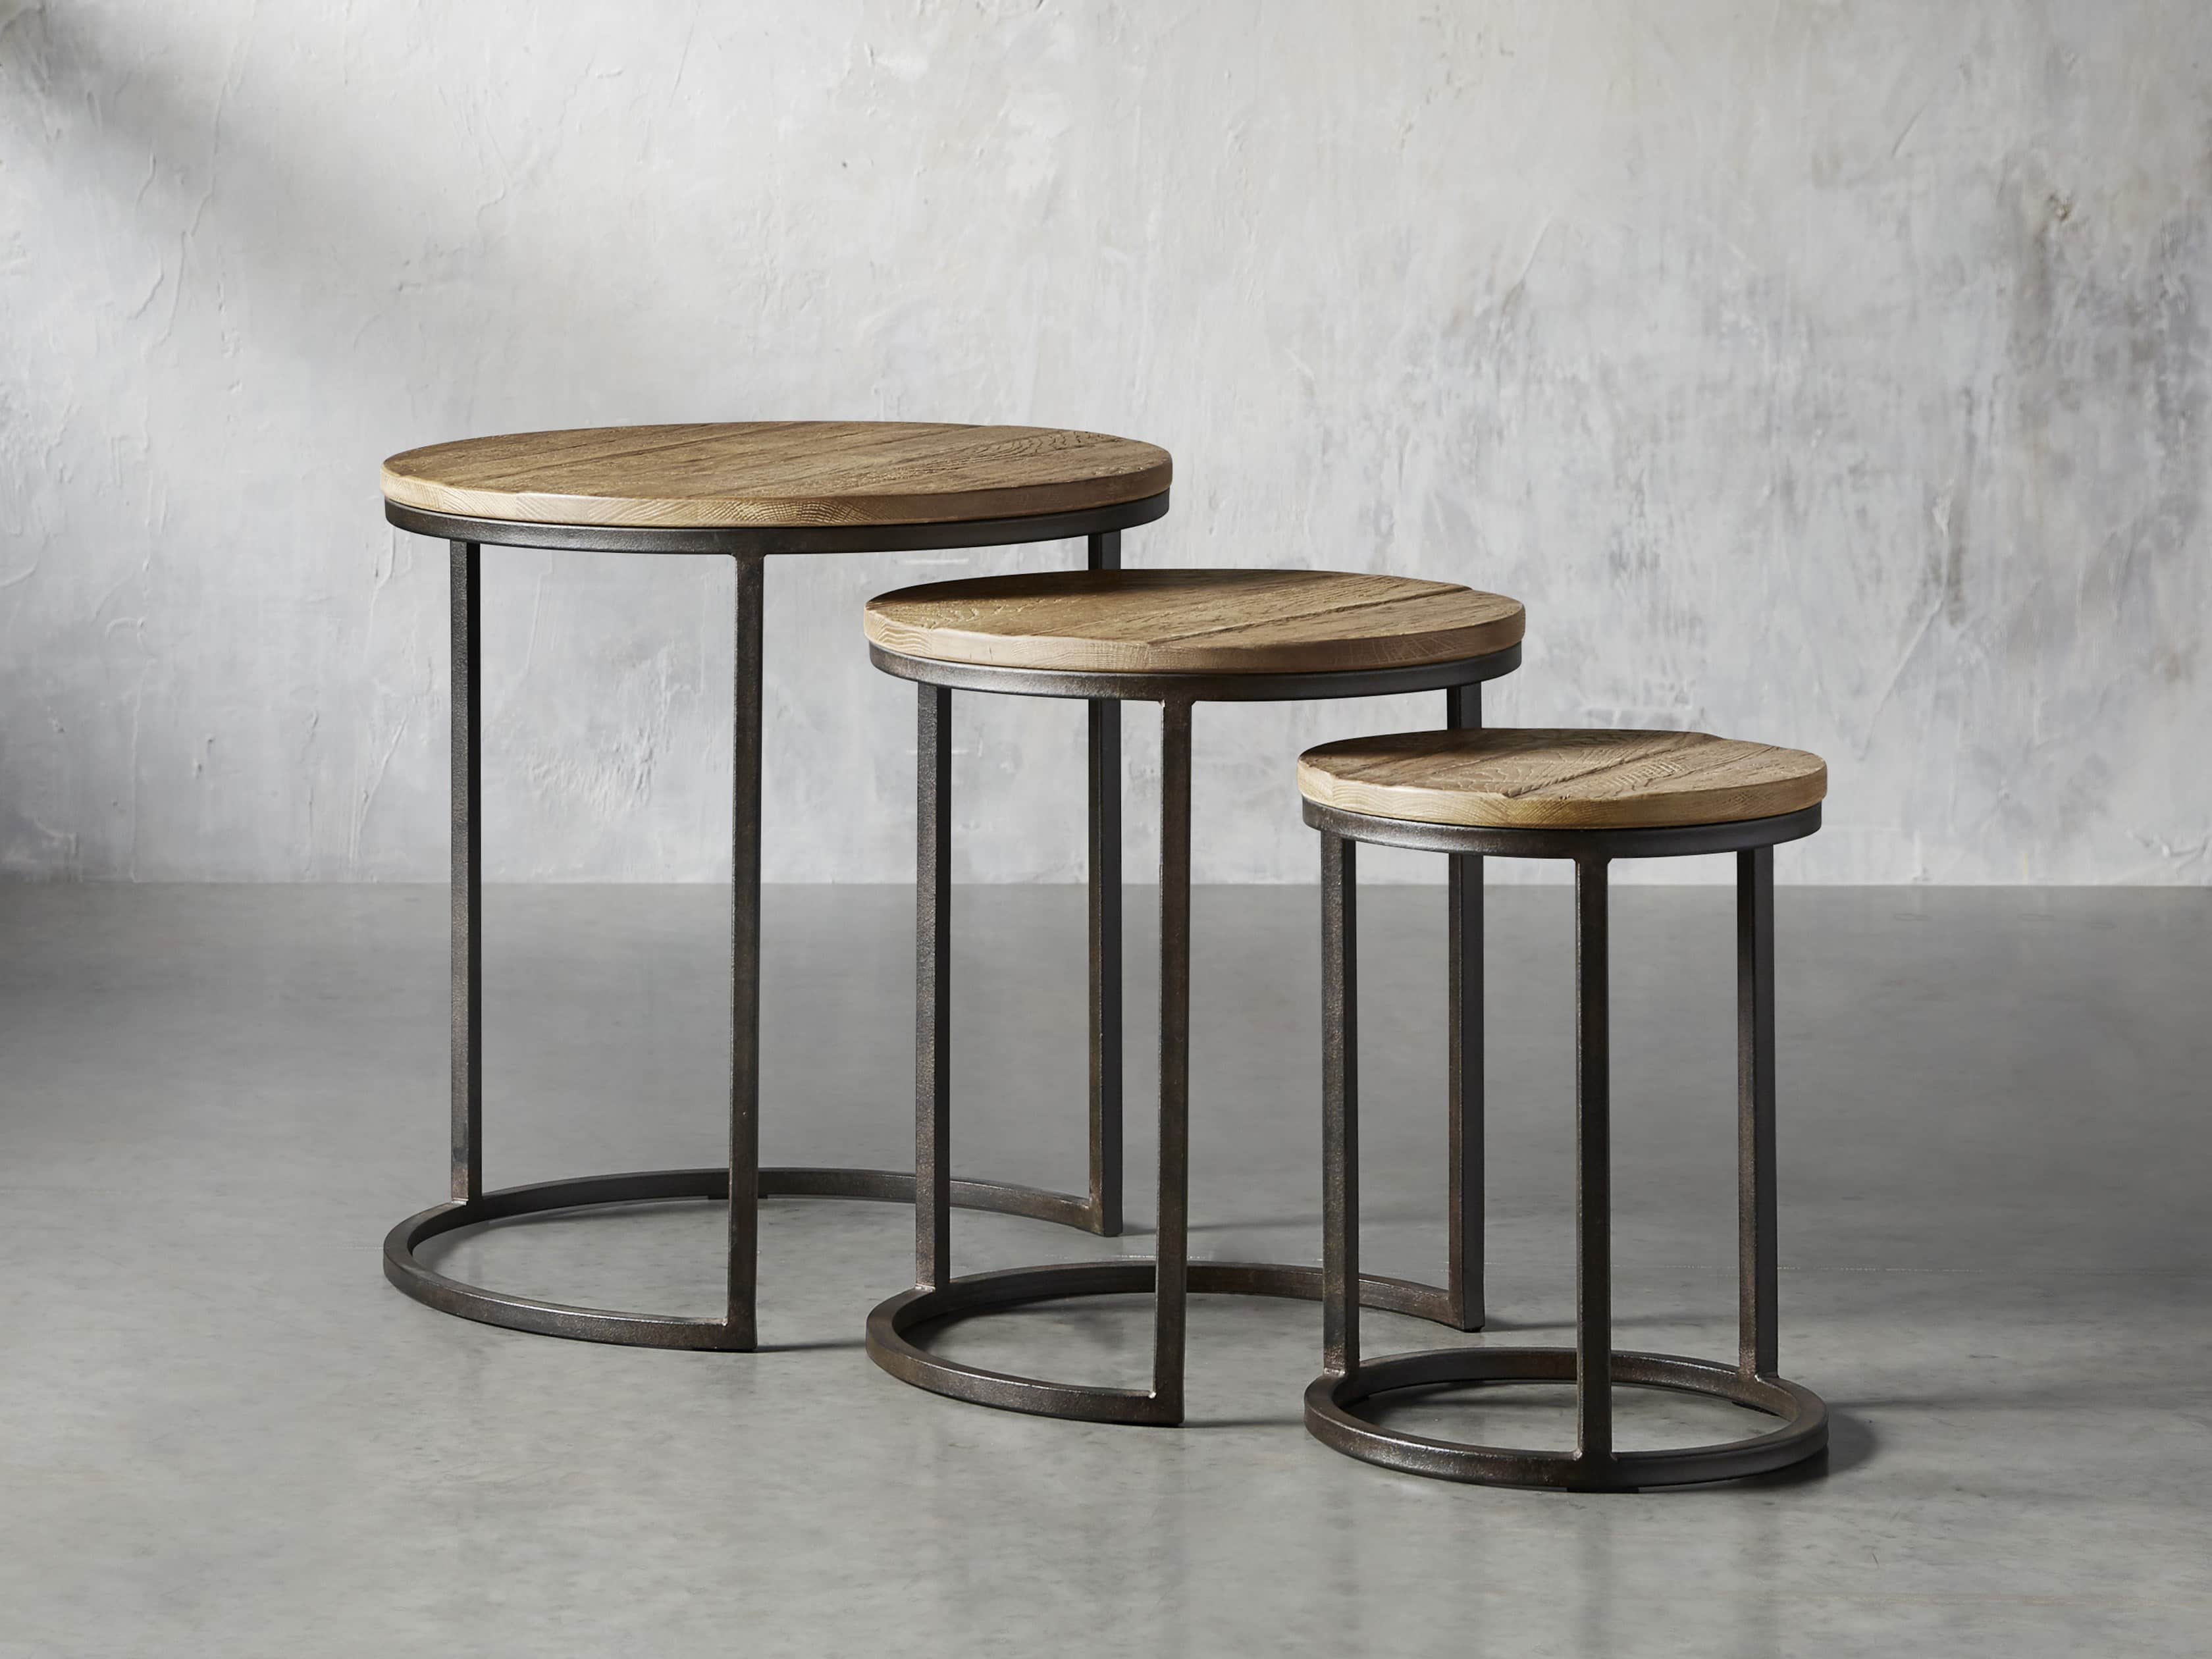 Palmer Round Nesting End Table Arhaus, Round Nesting Tables